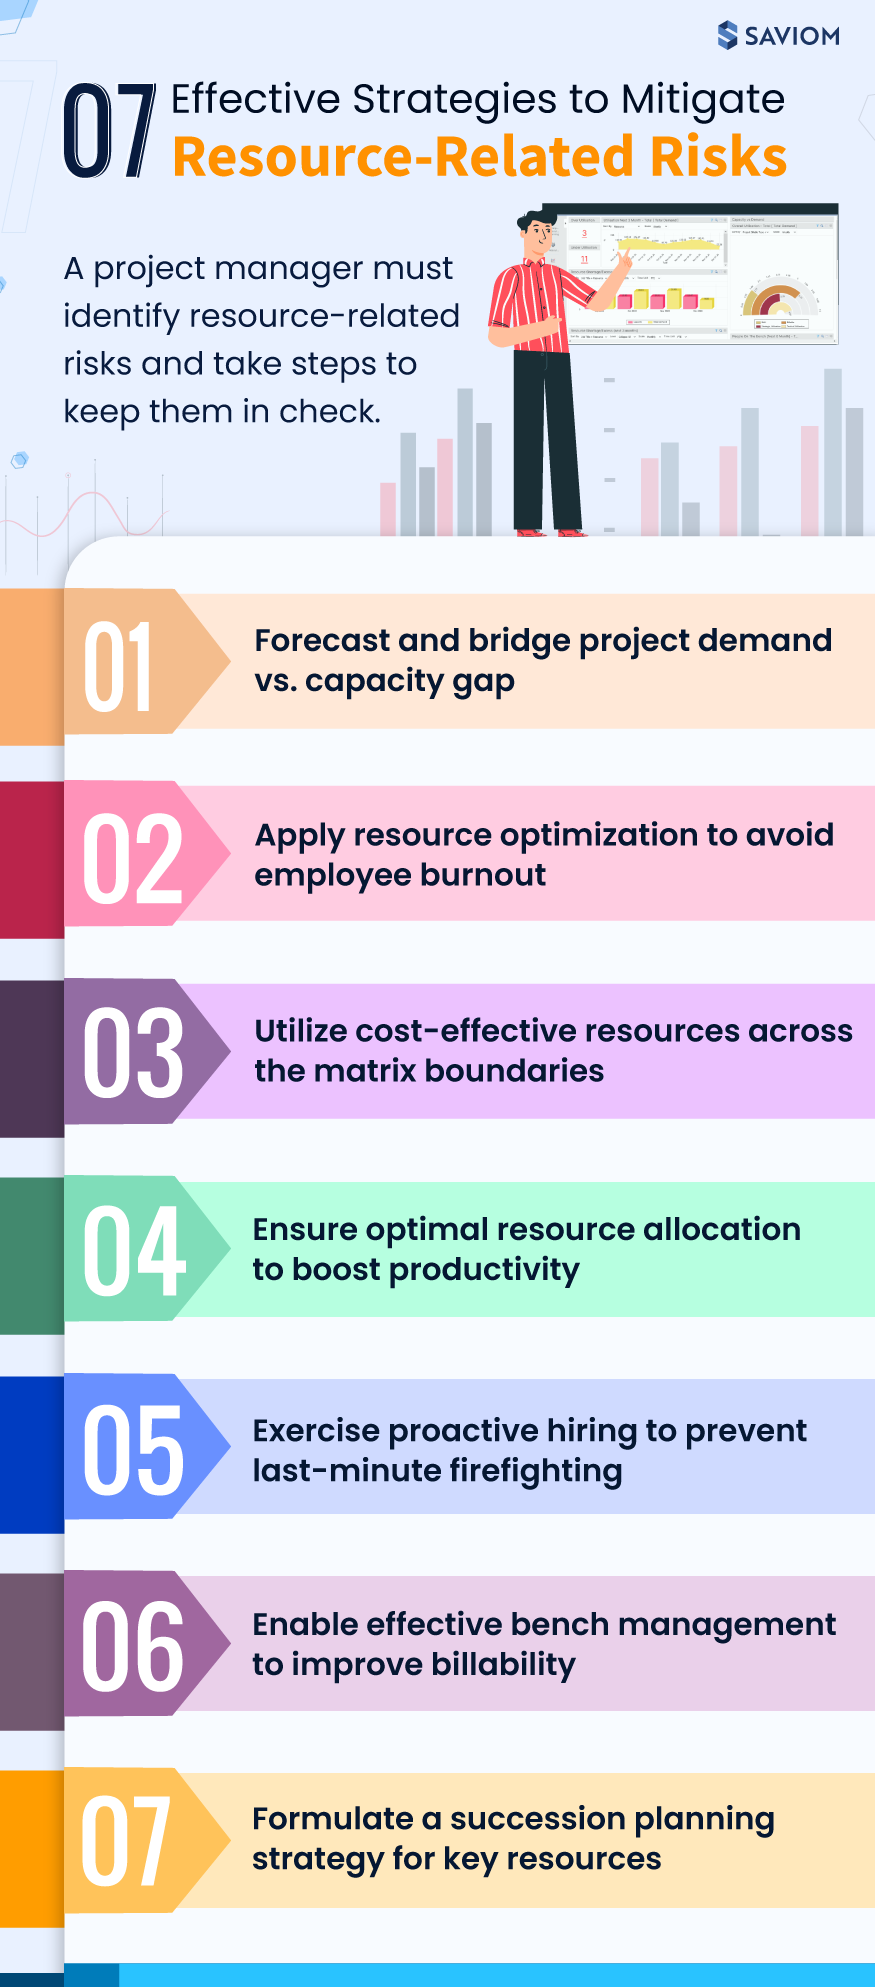 How to Mitigate Resource-Related Risks in Project Management